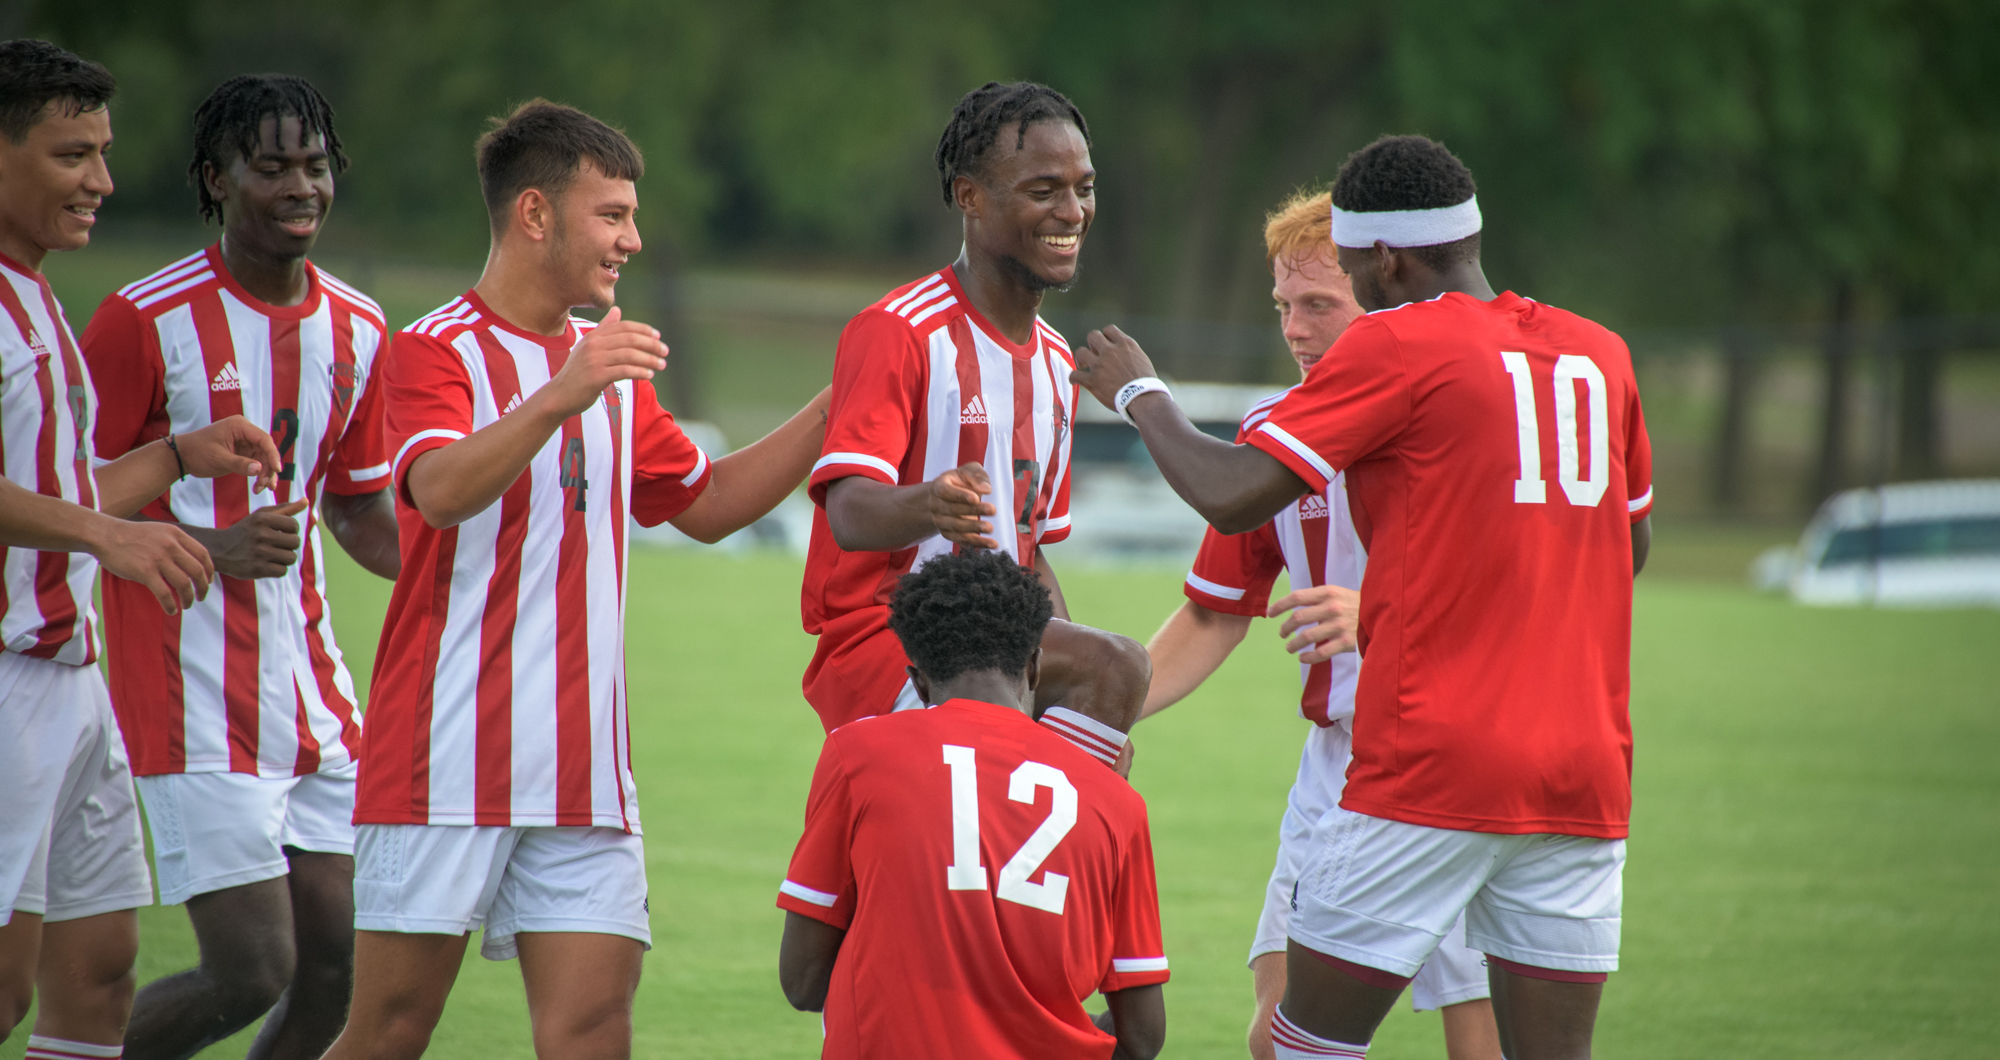 Men's Soccer opens season with win over Eastern